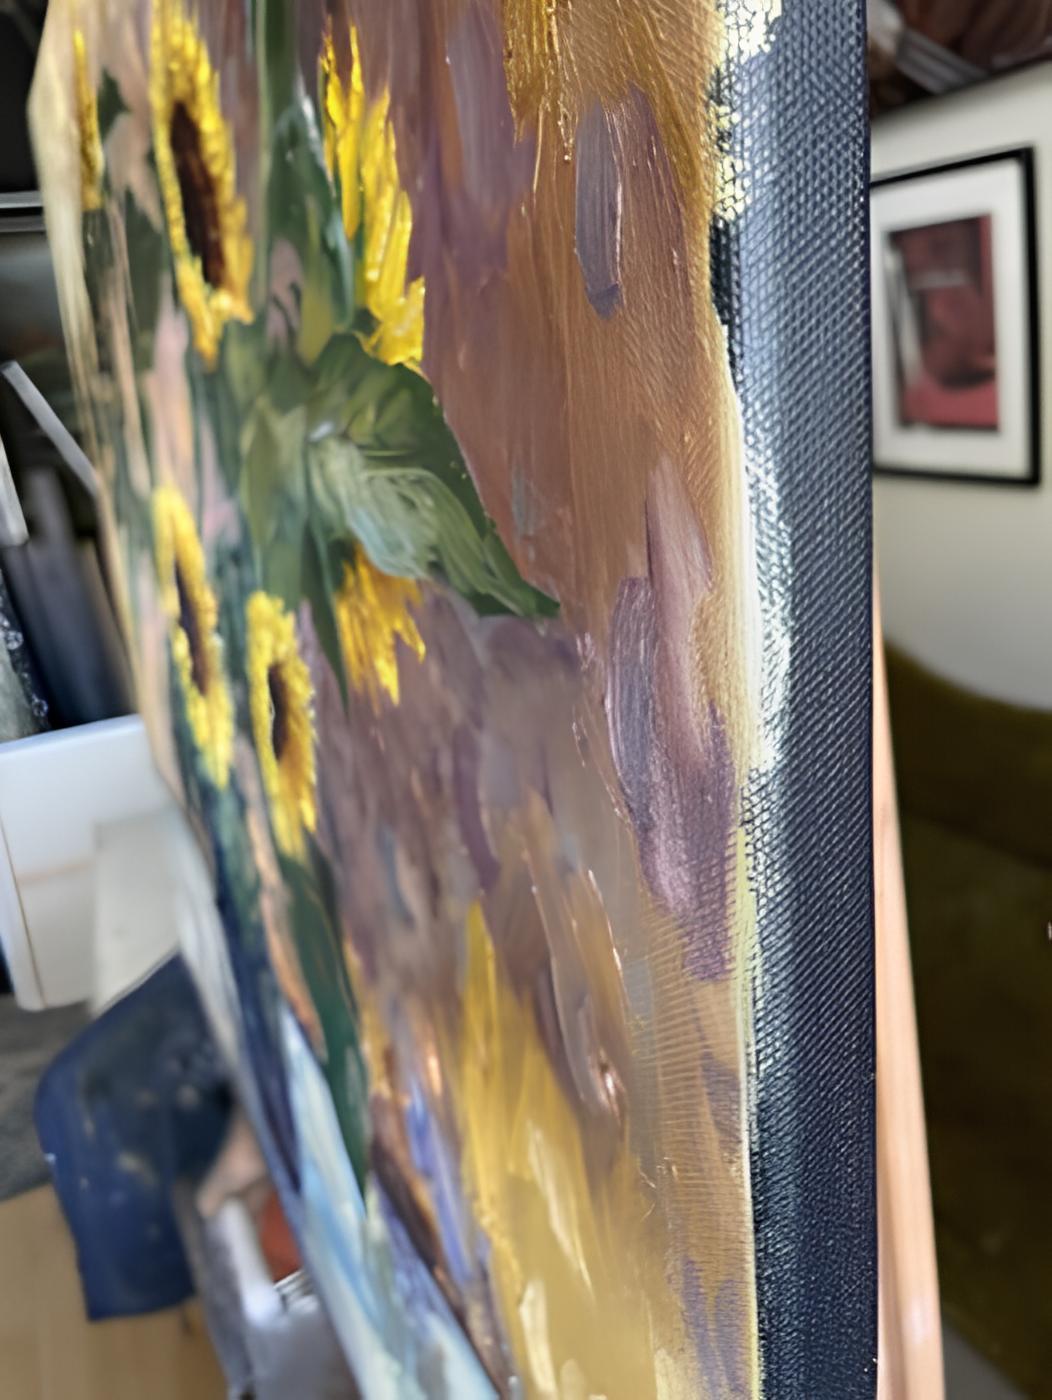 Through impasto strokes and vivid oils, I've brought to life a dance of sunflowers, capturing their raw, sunlit essence. In a harmonious clash of warmth against cool blues, the emotion in this impressionistic scene resonates with nature's bold